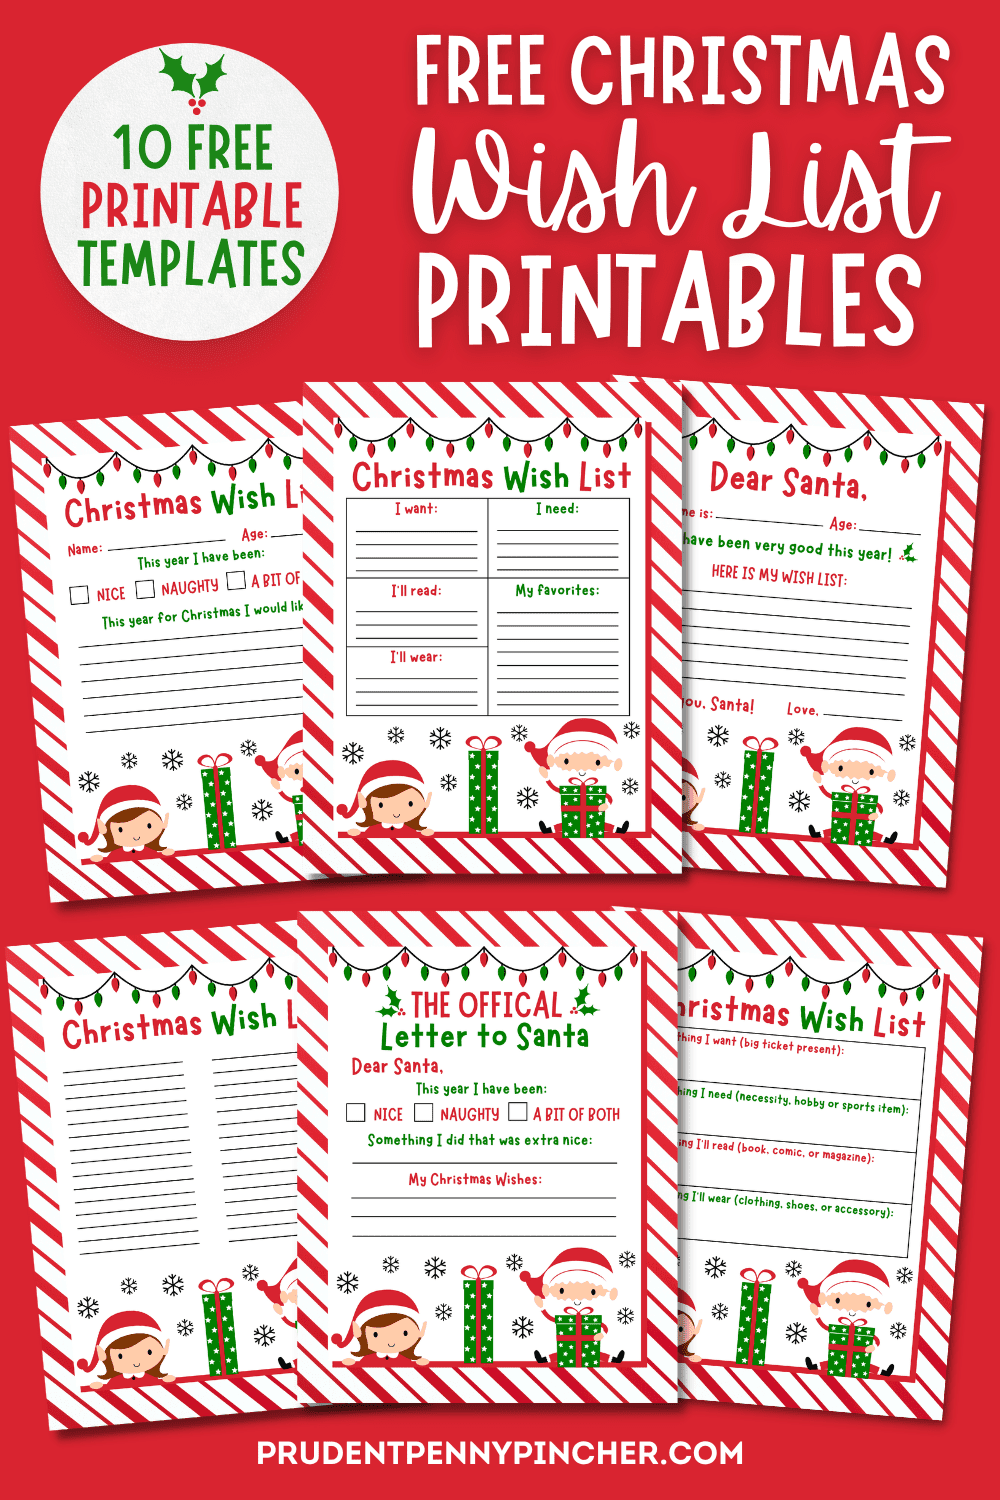 10 Free Christmas Wish List Printables for Kids - Prudent Penny